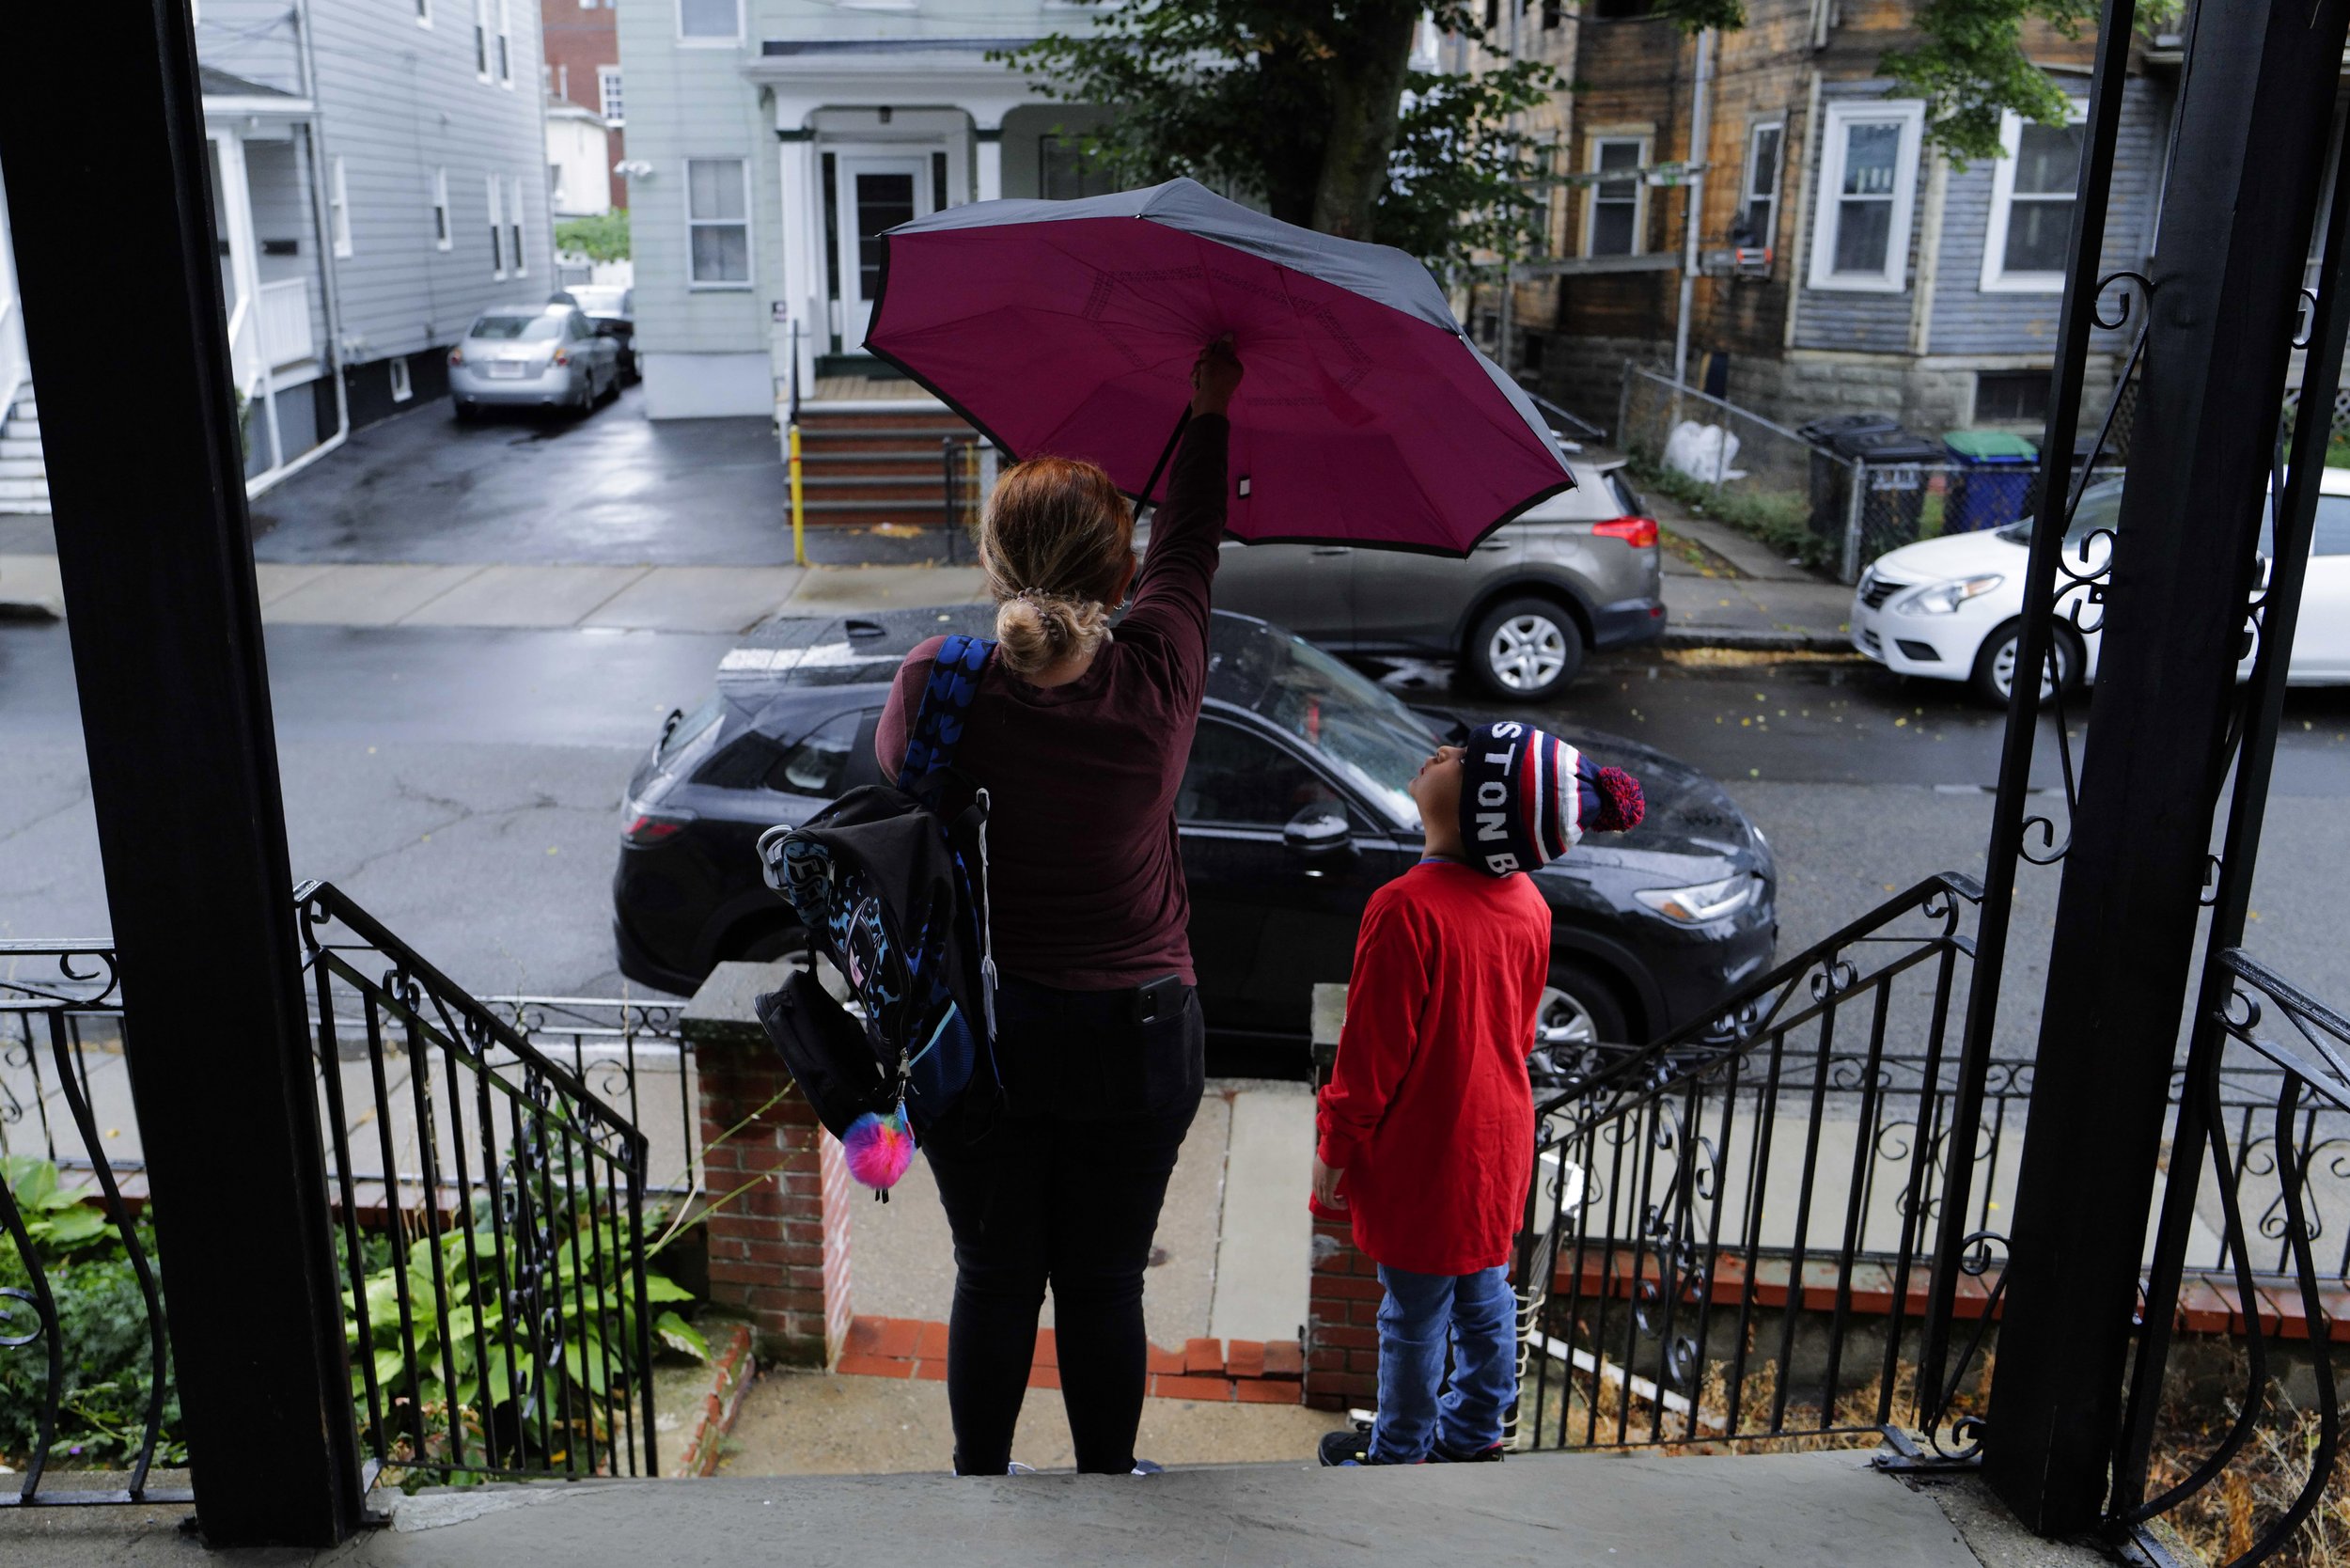  Teresa (left) opens up an umbrella next to her son Raul Alexis, 6, before a rainy walk to school from their old residence in Somerville, Mass. on August 31, 2022. 